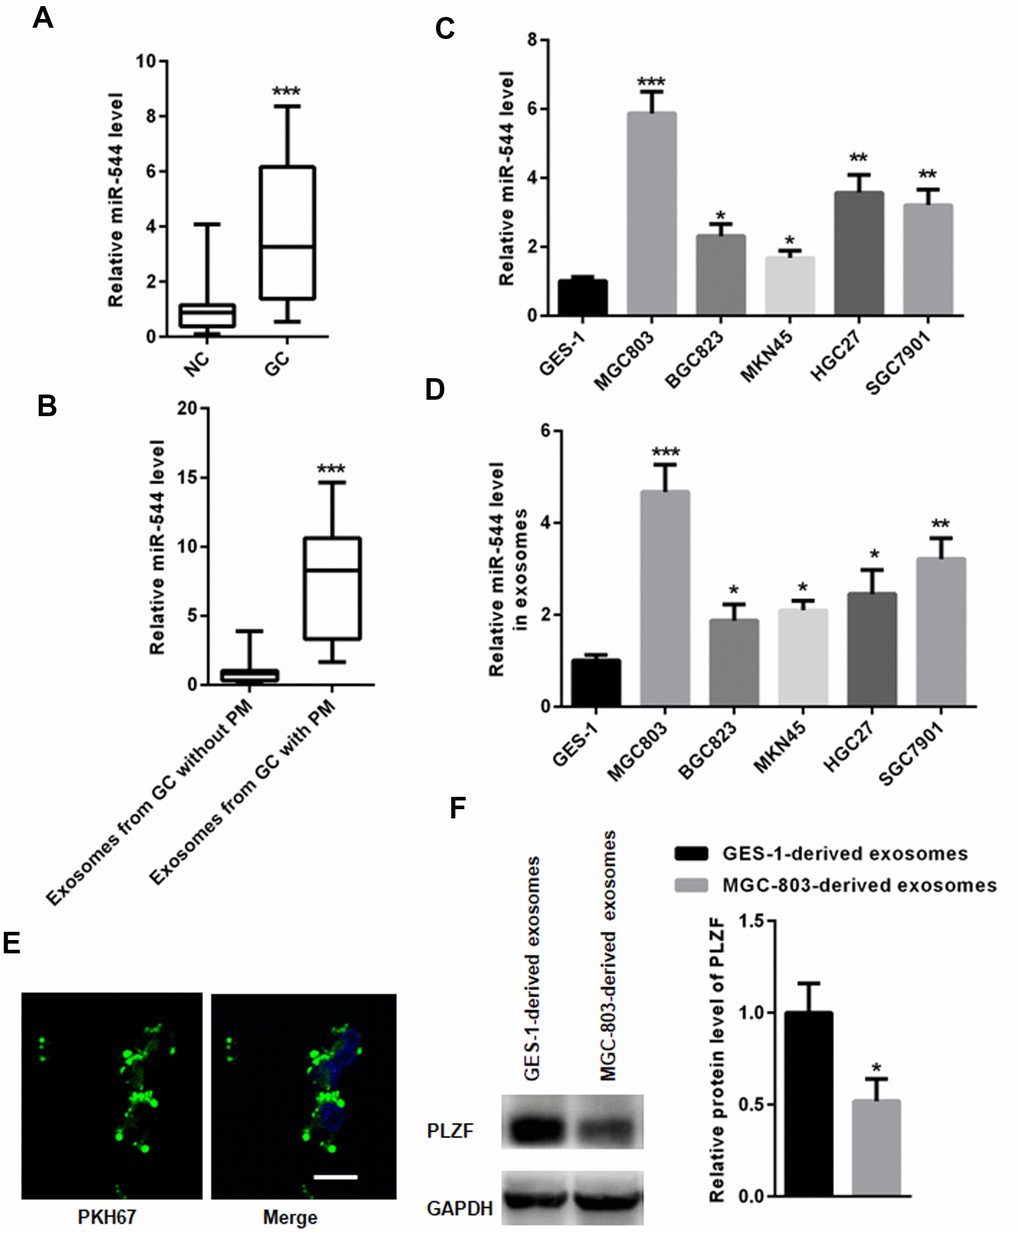 miR-544 is transferred from GS-derived EVs to peritoneal cells. (A) RT-PCR of miR-544 in GC tissues. (B) RT-PCR of miR-544 in EVs isolated from GC patients with and without PM. (n=68 for GC patients without PM, n=65 for GC patients with PM, two-tailed unpaired student’s t-tests) (C) RT-PCR of miR-544 in GC cell lines MGC803, BGC823, MKN45, HGC27, and SGC7901. (D) RT-PCR of miR-544 in EVs isolated from GC and GES-1 cells. (E) PKH67-labeled EVs in HMrSV5 cells (bar represents 10 μm). (F) PLZF expression in HMrSV5 cells co-cultured with MGC-803-and GES-1-derived EVs. (n=3, one way ANOVA for C, D, E and F).